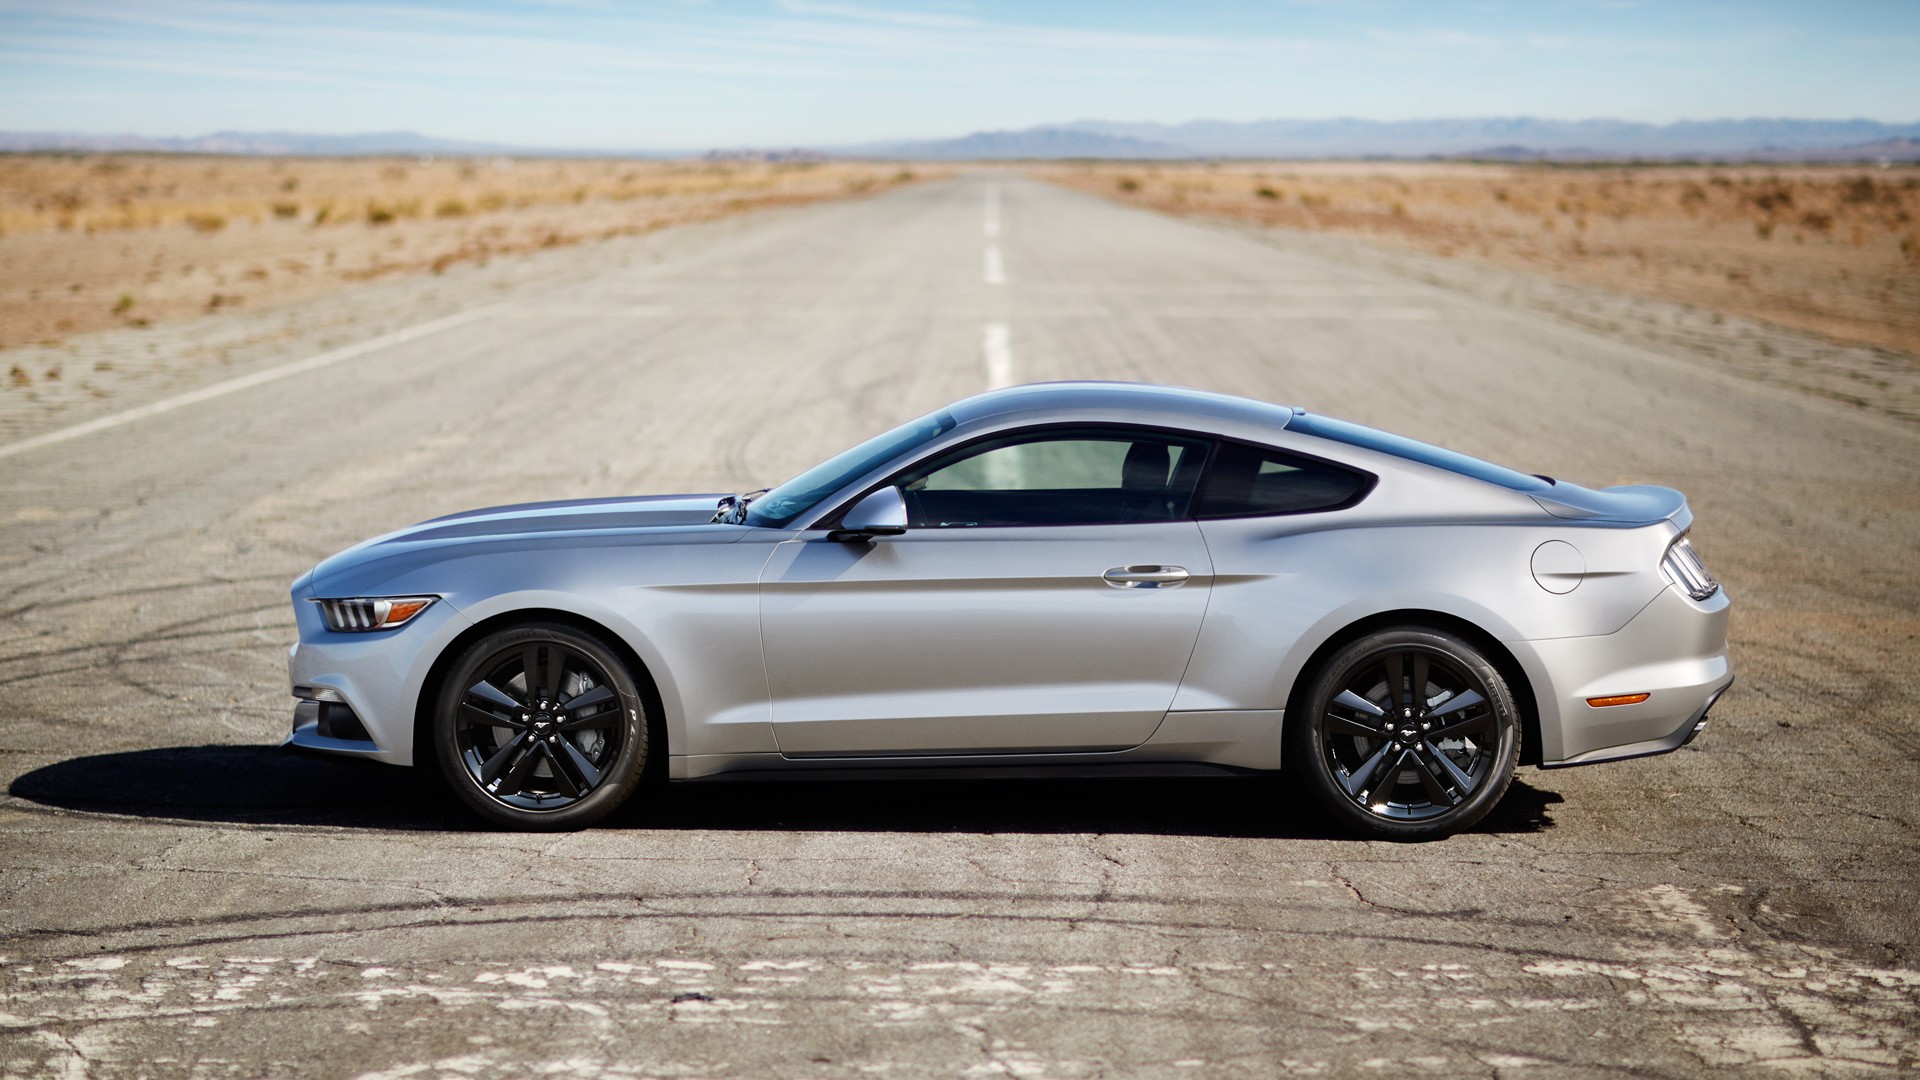 Ford Ford Mustang GT 2015 Car 1920x1080